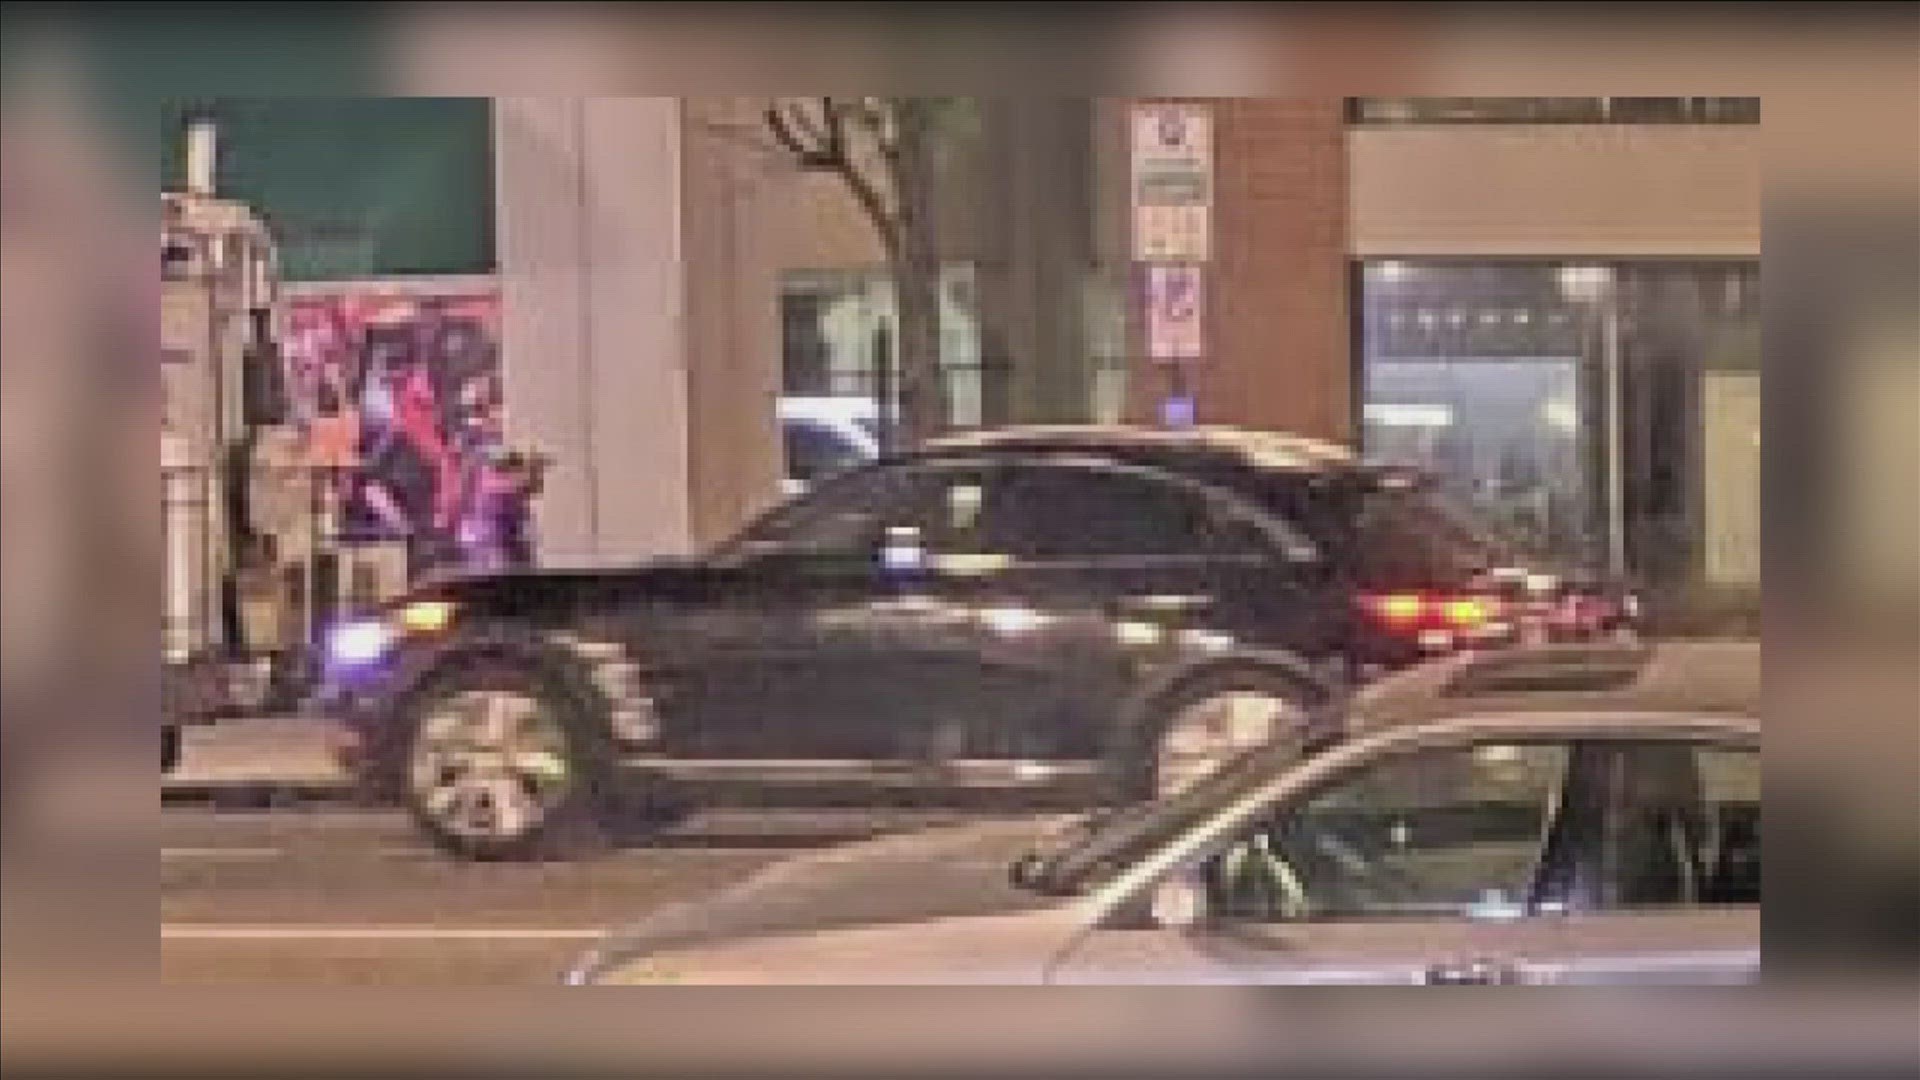 Tuesday, Memphis Police released photo and video of a car they said was used in the downtown mass shooting on Sunday that injured eight people.